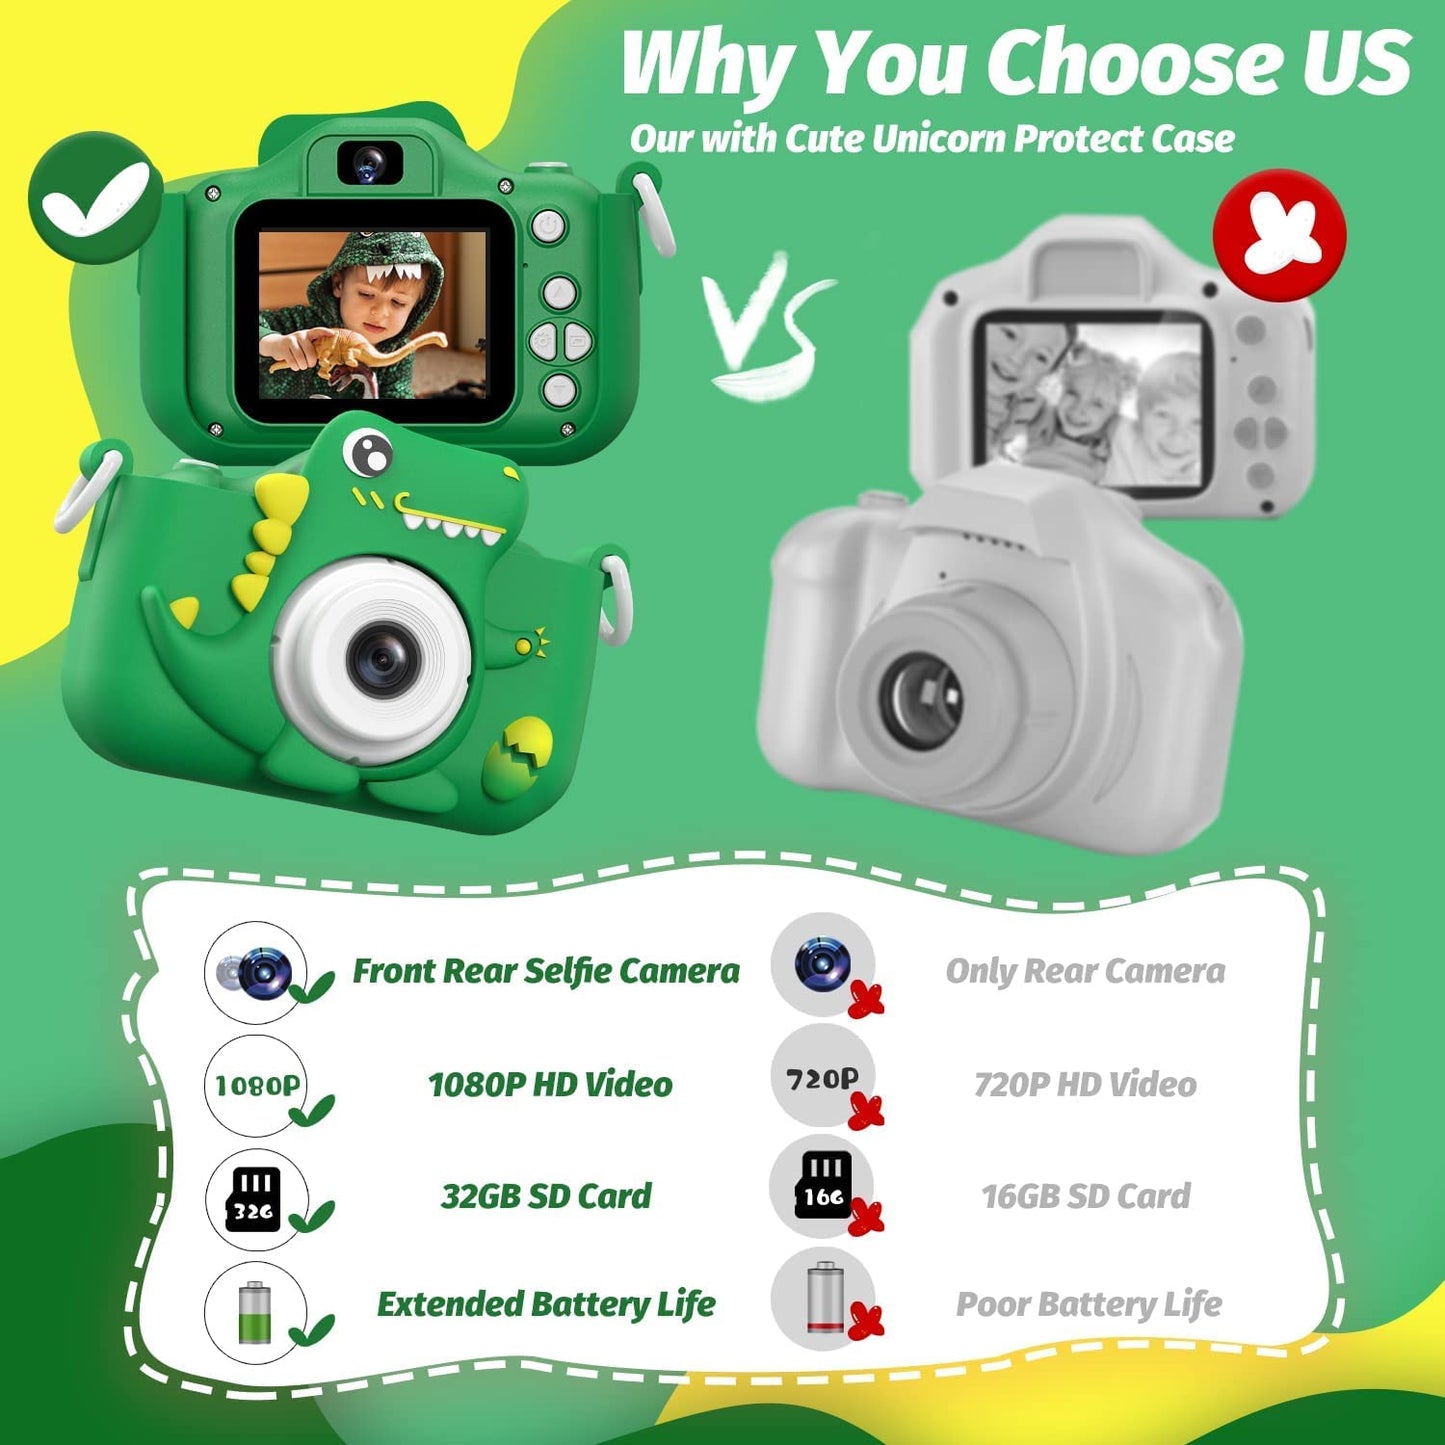 ZONEY Kids Camera, ZONEY Toy Camera for Girls Boys, Upgrade Unicorn Kids Digital Camera with Video, 32GB 1080P HD Selfie Video Camera for Toddlers, Cute Portable Little Girls Boys Gifts Toys (Green)